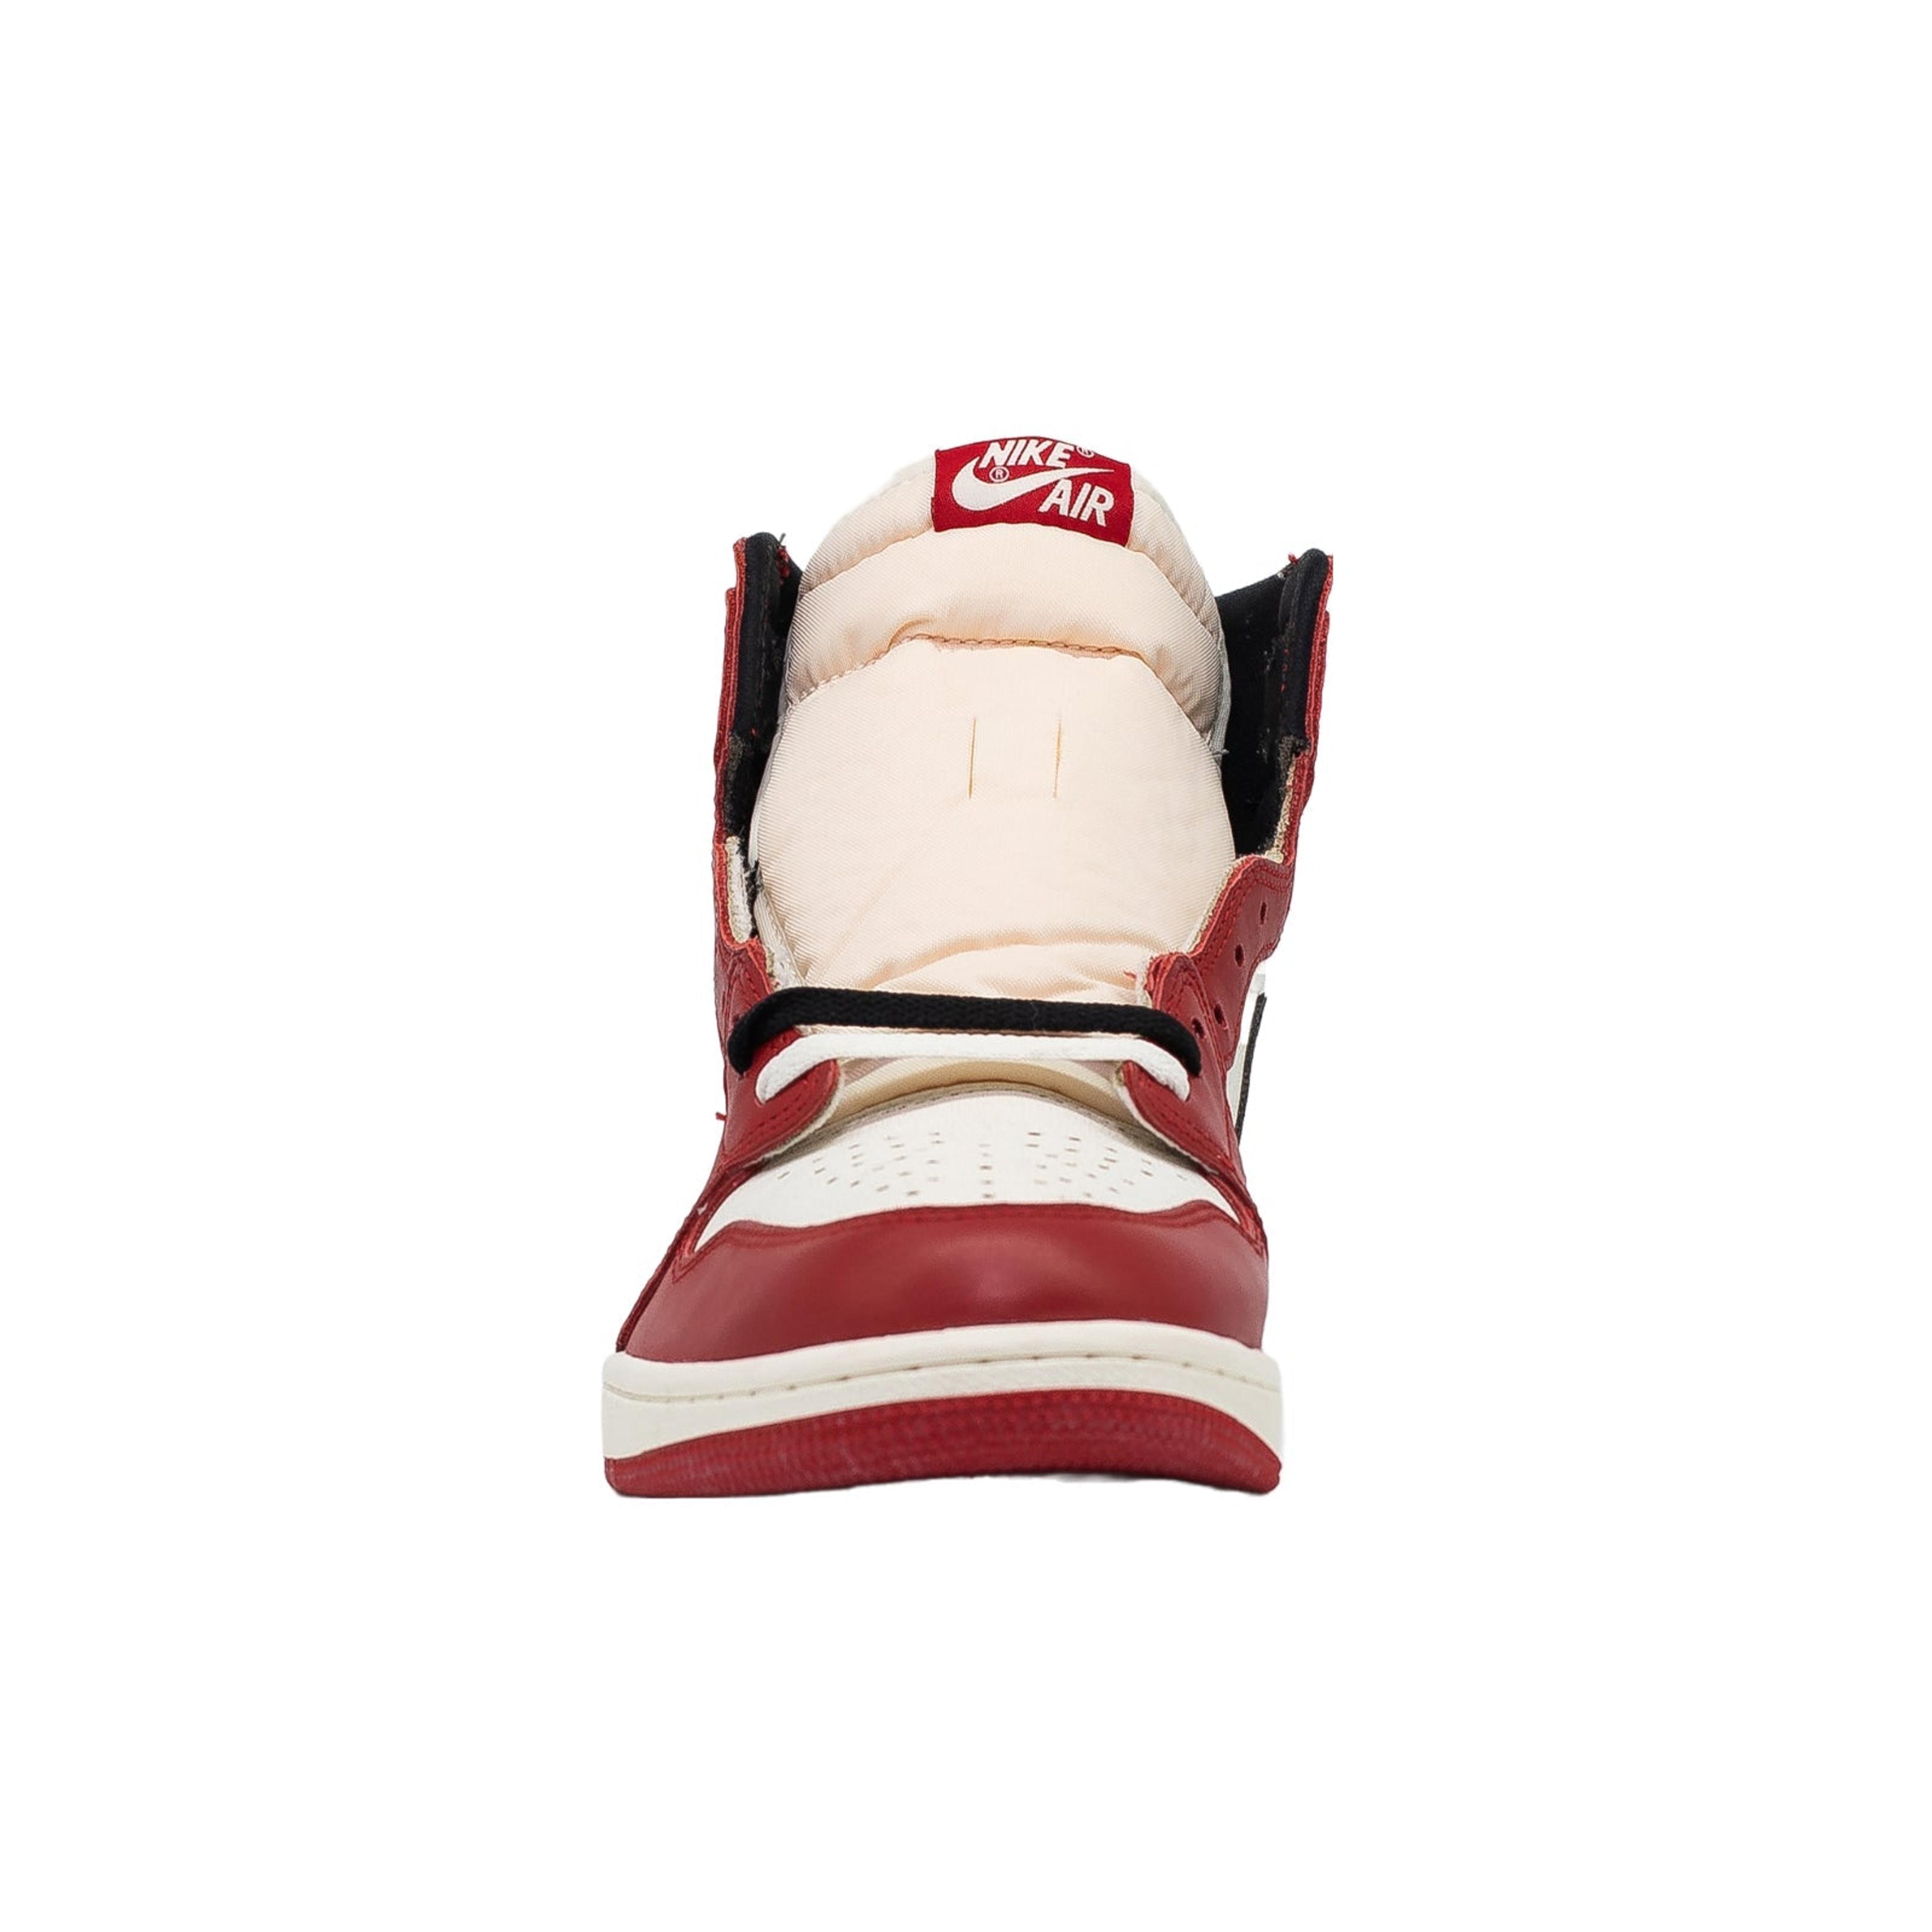 Alternate View 2 of Air Jordan 1 High, Chicago Lost and Found